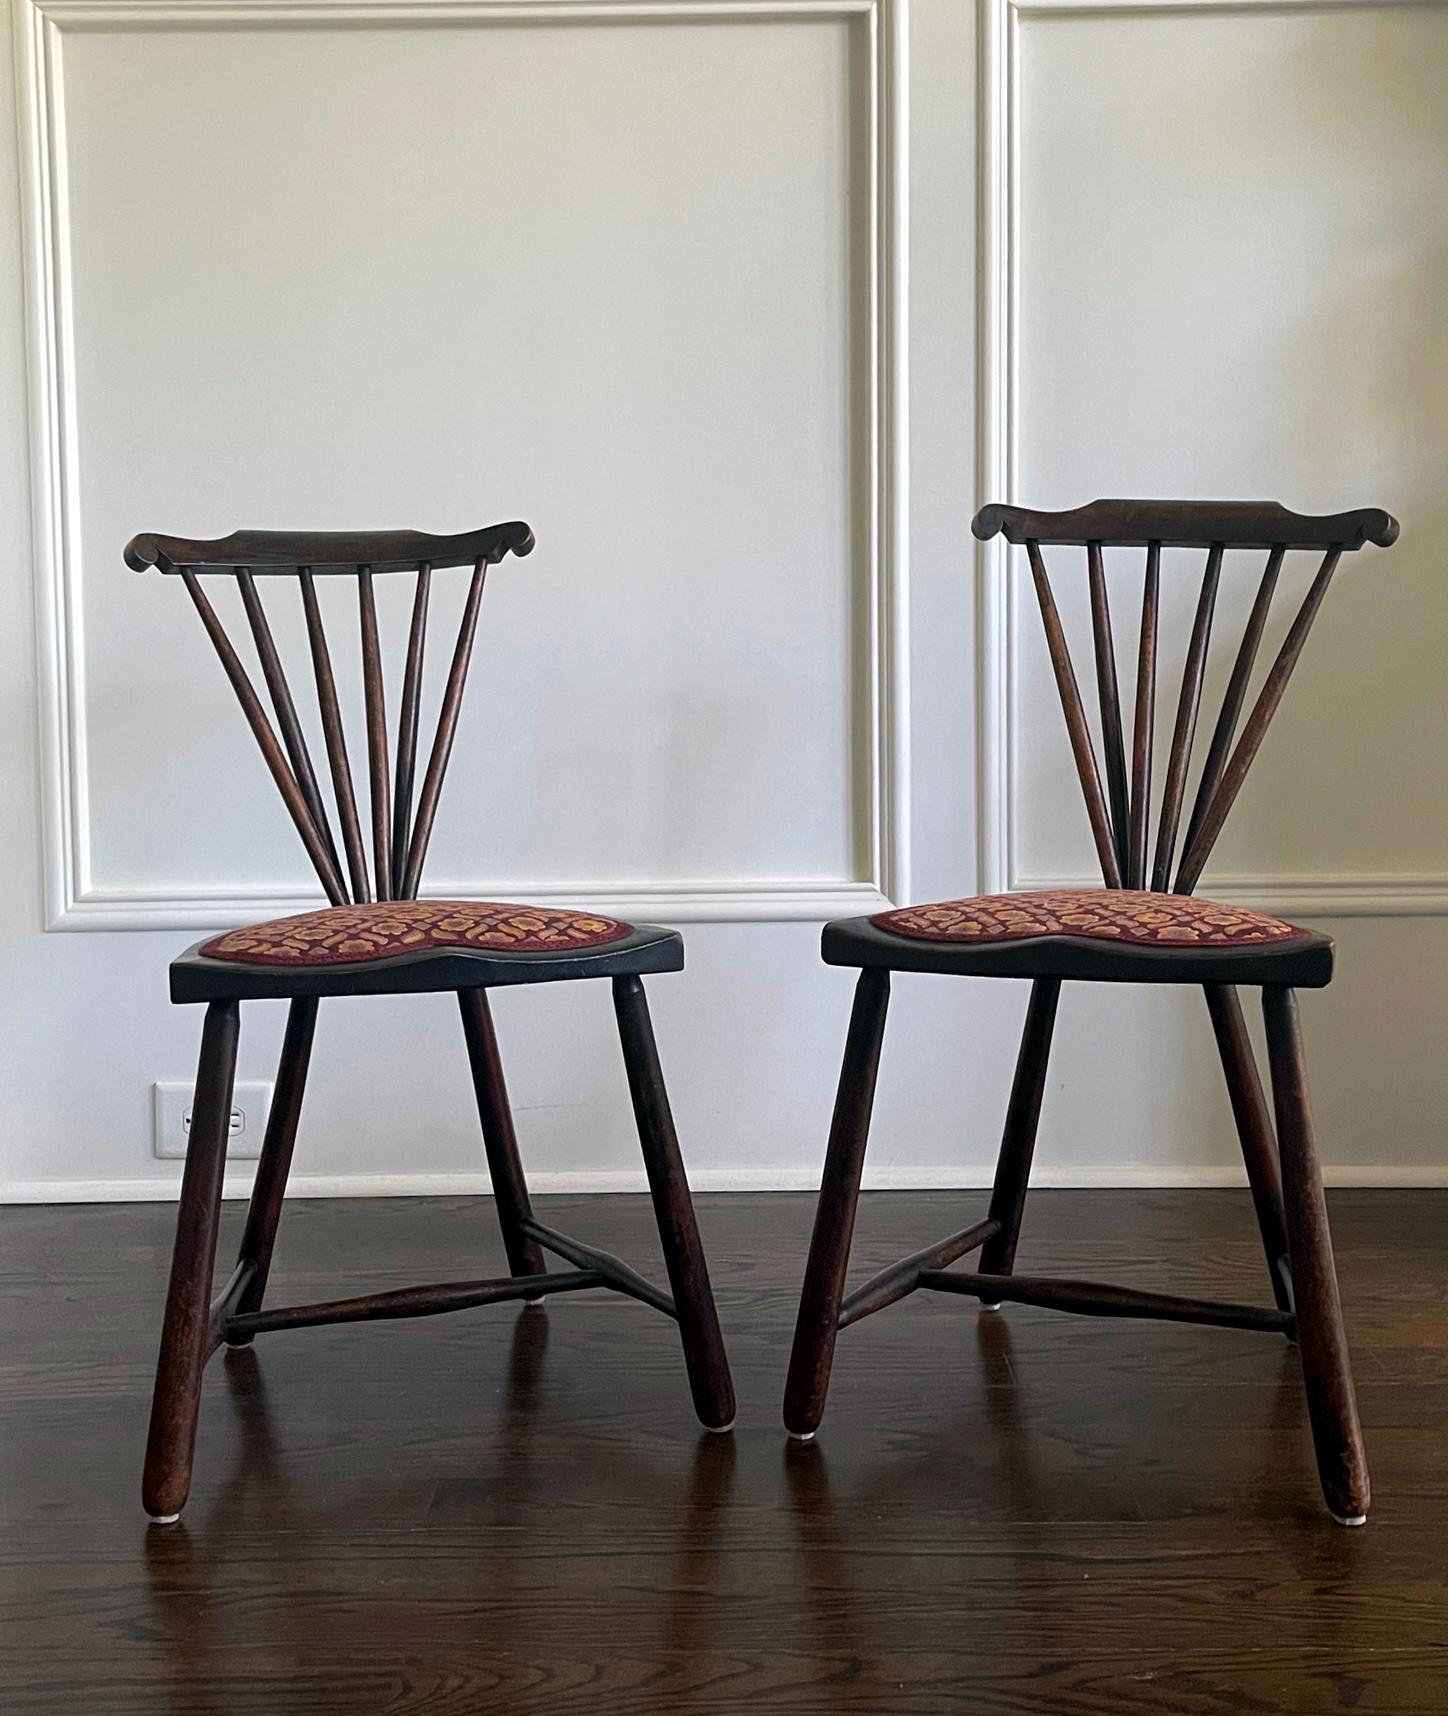 On offer is a rare original paired Fan-Back Chairs designed by Adolf Loos (1870-1933) circa 1908-20s. As part of the Vienna Secession movement, these chairs display modern silouette emerged from the beginning of the century, a design departure from